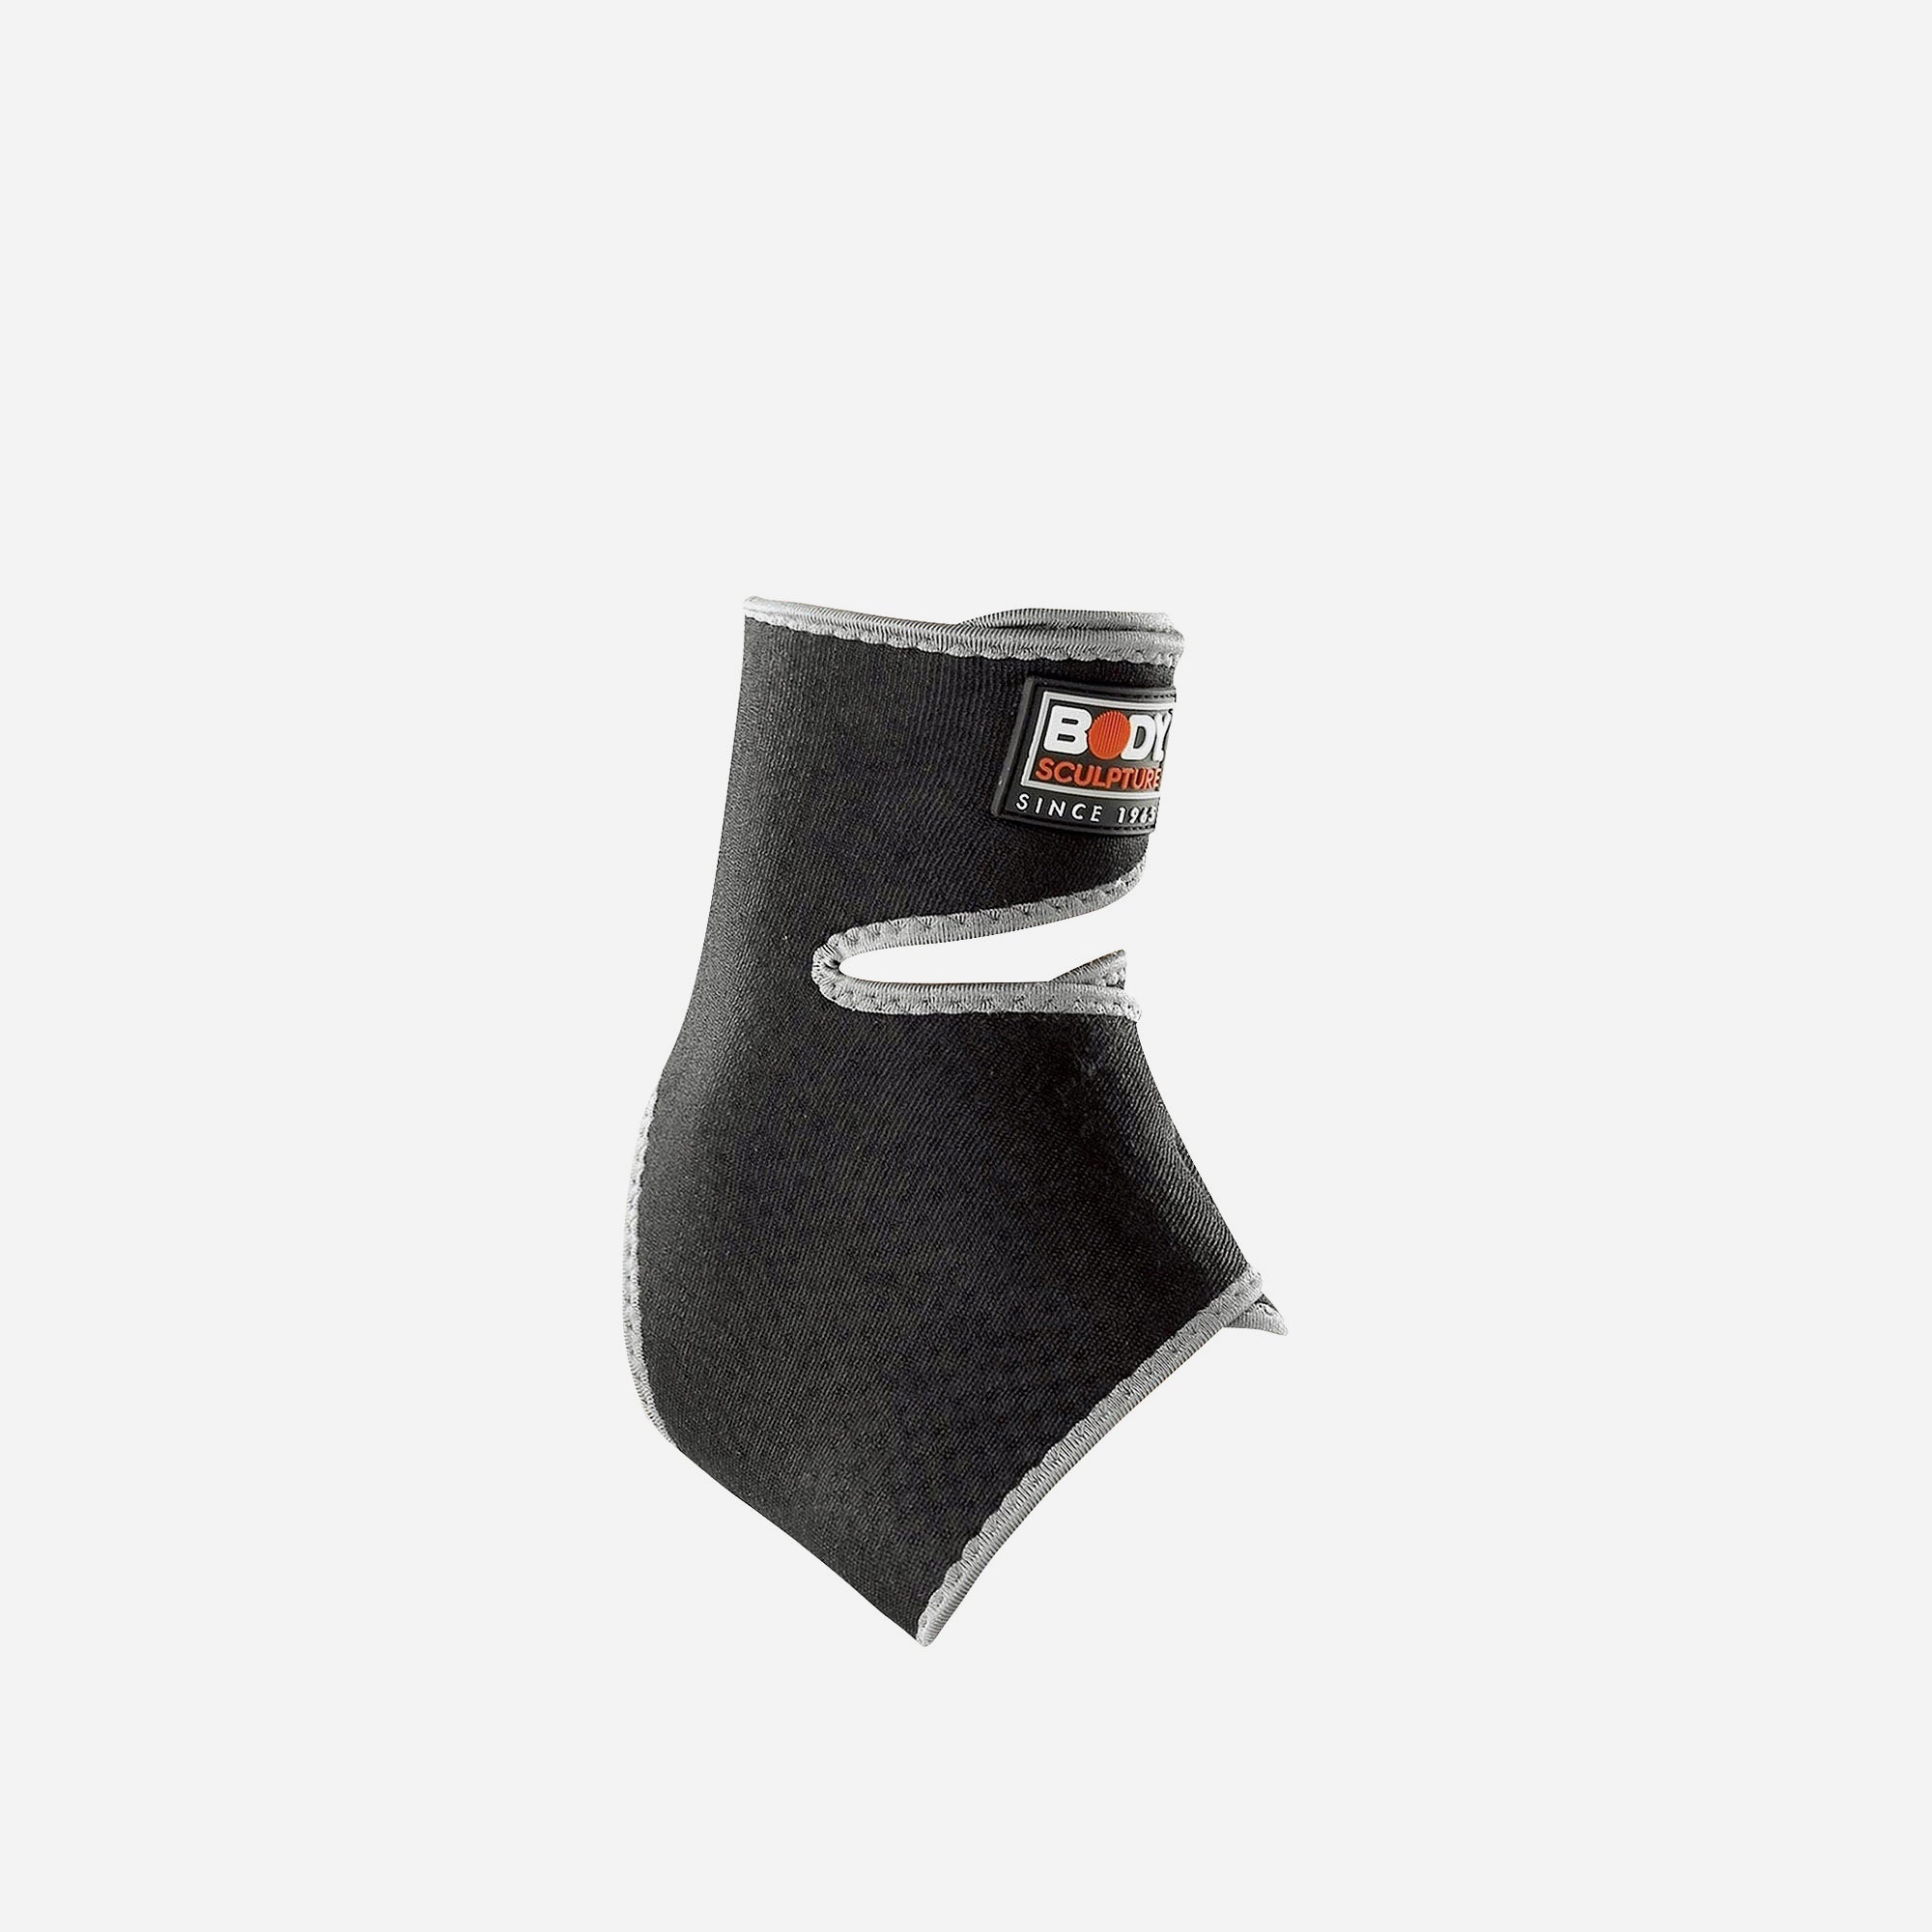 Dụng Cụ Hỗ Trợ Mắt Cá Chân Body Sculpture Ankle Support With Terry Cloth - Supersports Vietnam